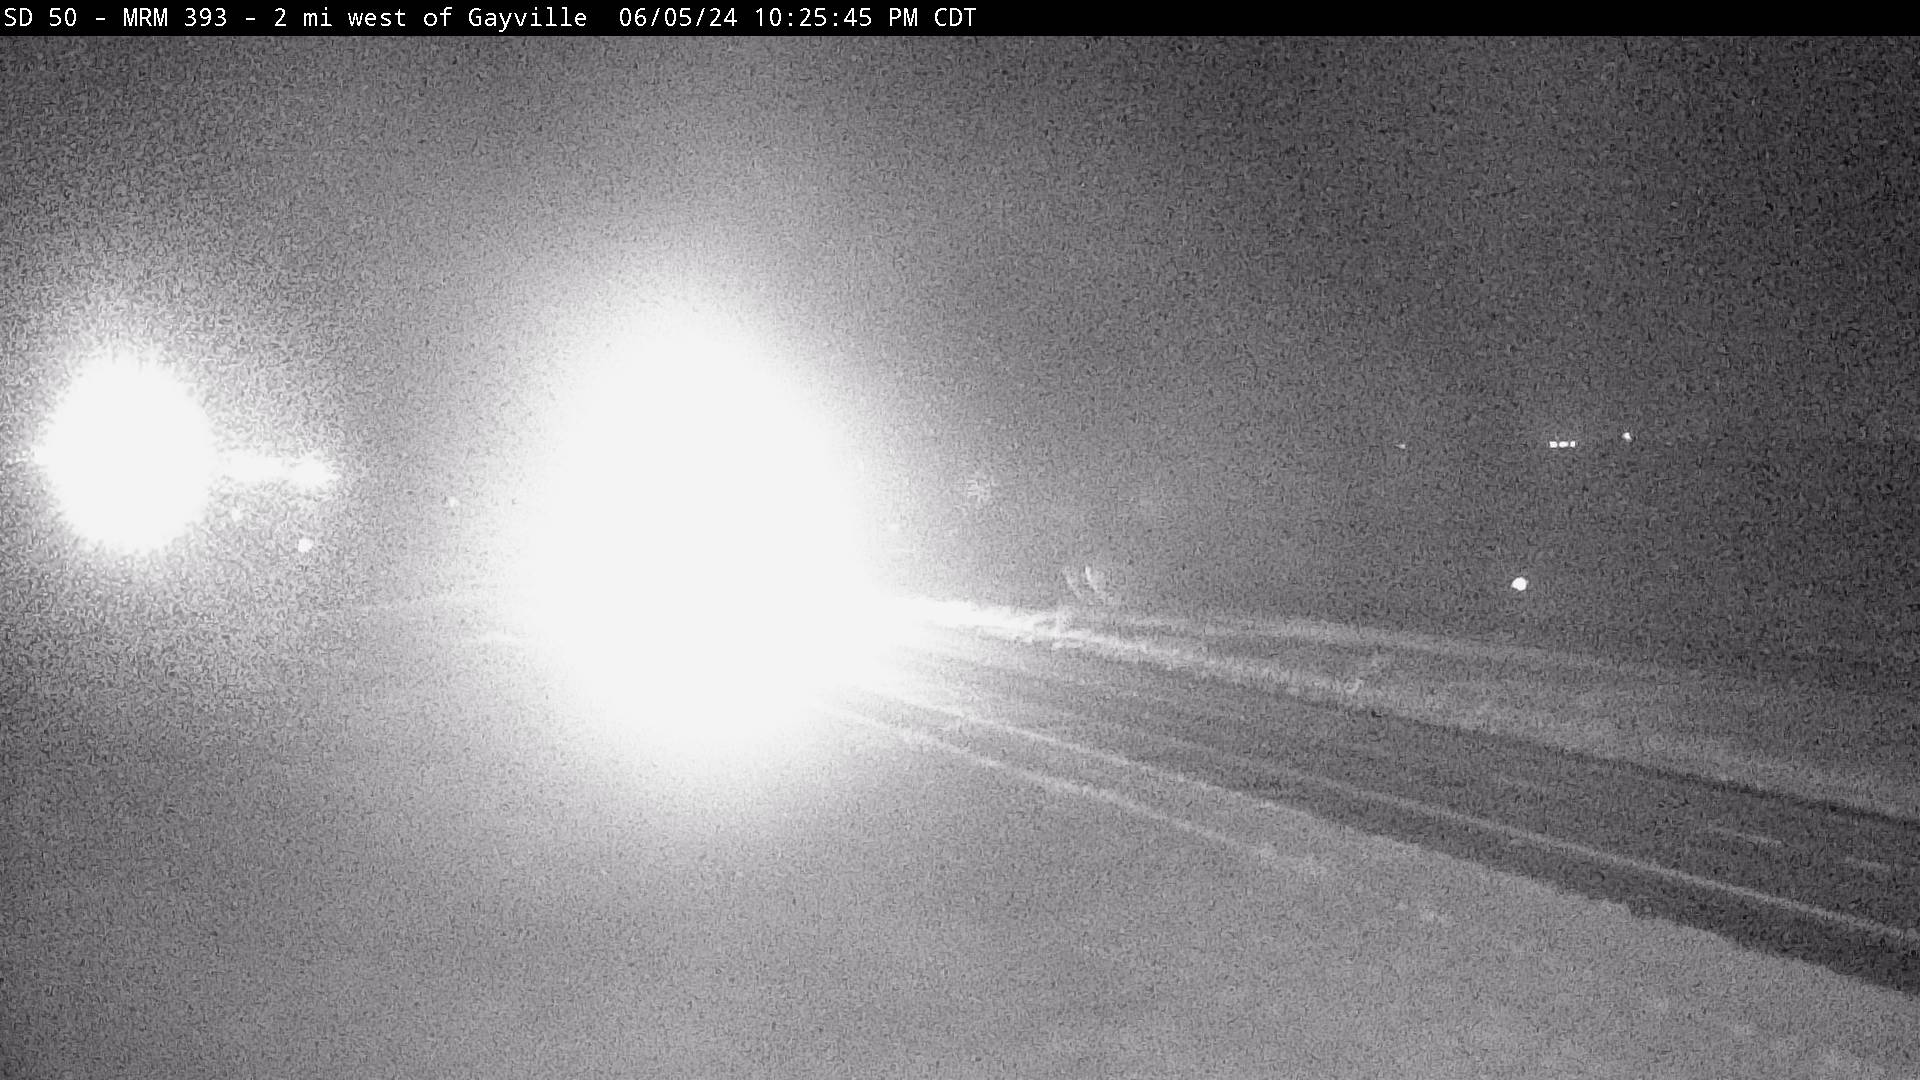 2 miles west of town along SD-50 @ MP 393 - East Traffic Camera